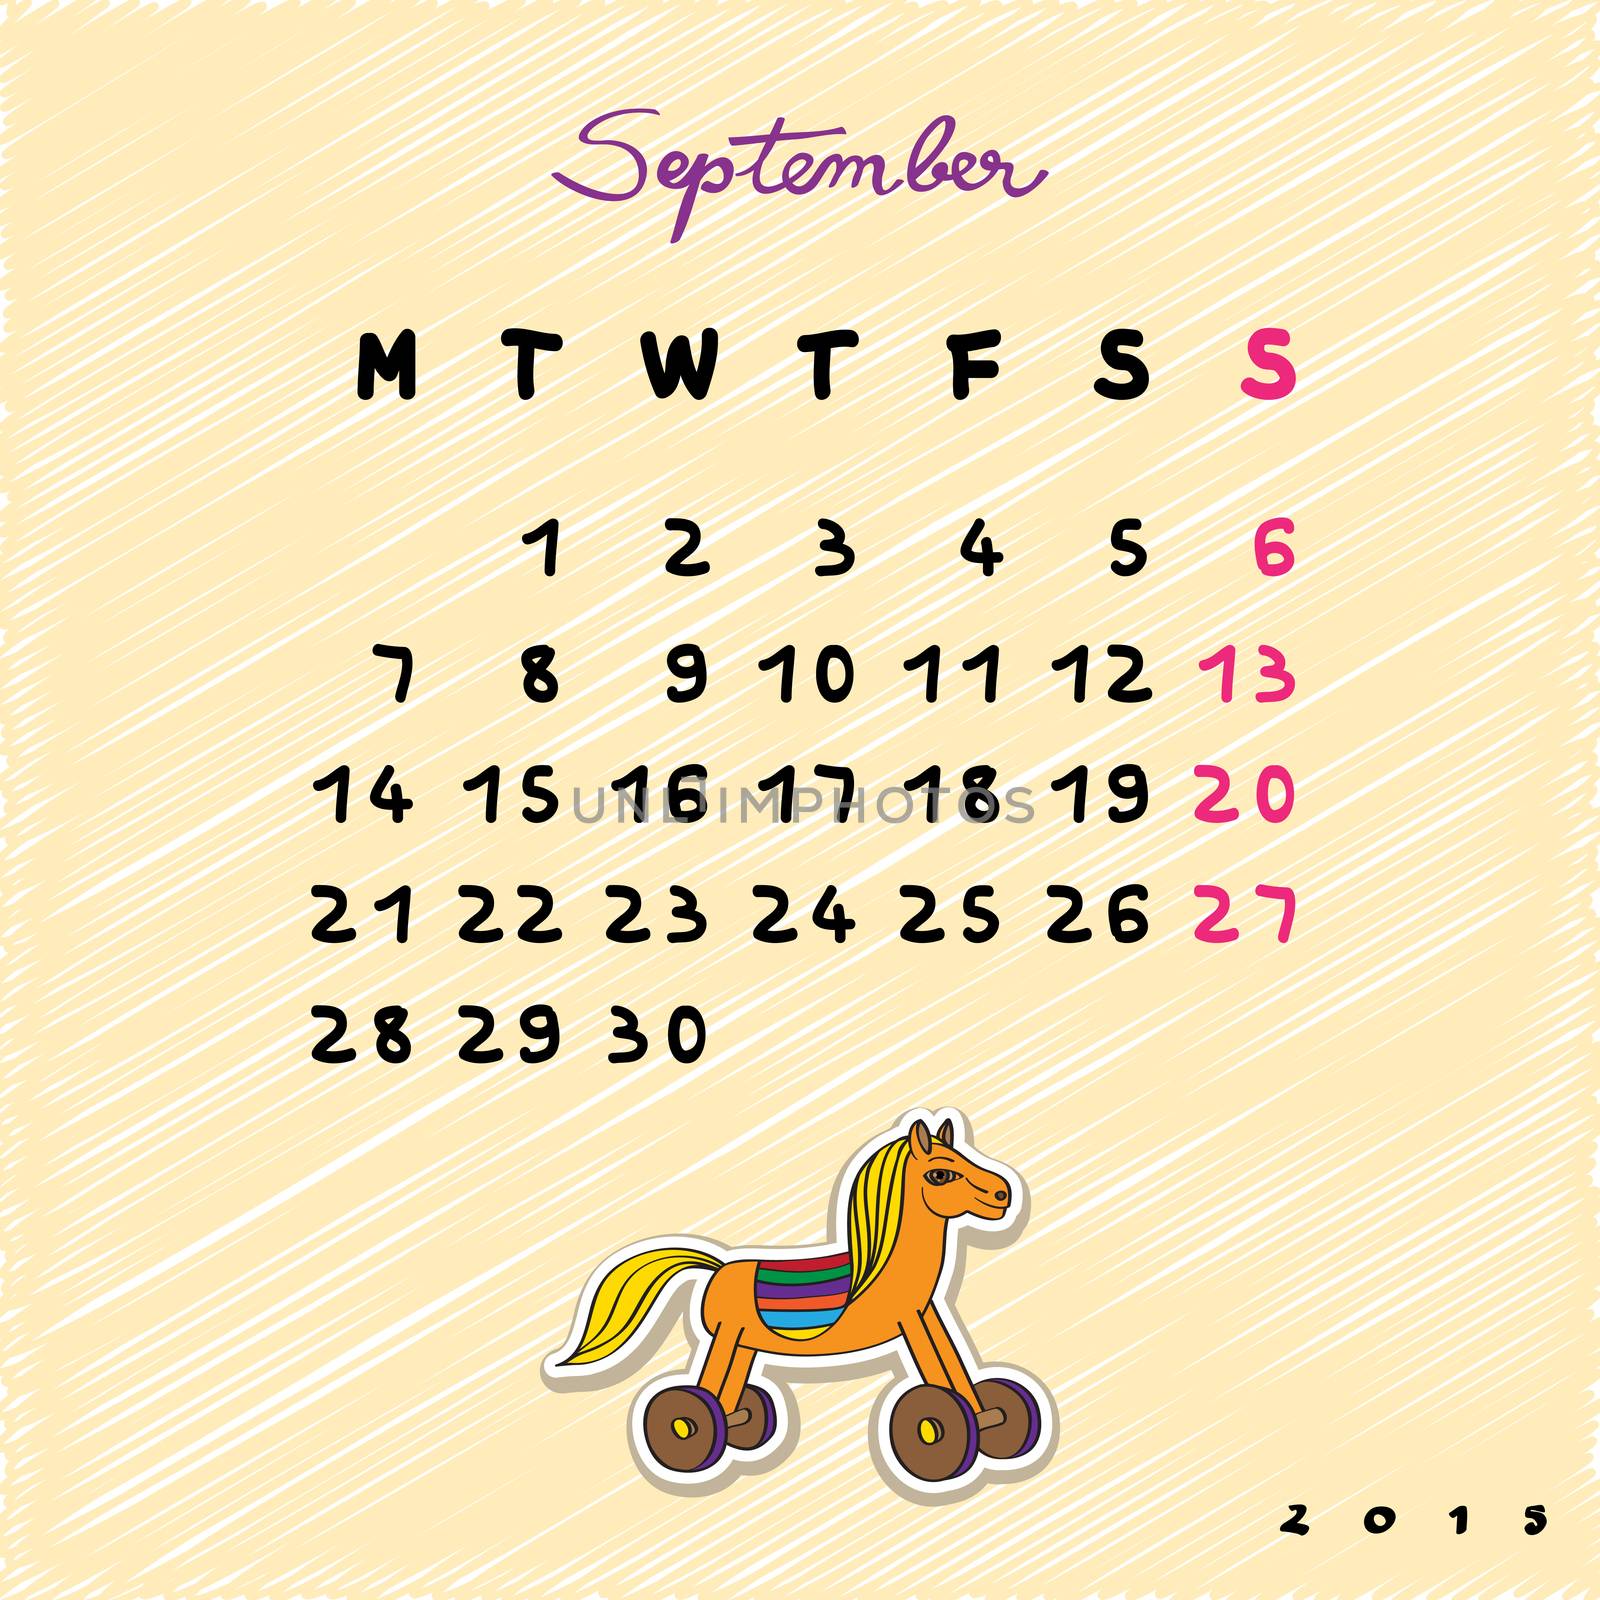 Calendar 2015 with toy horse, graphic illustration of September month calendar with original hand drawn text